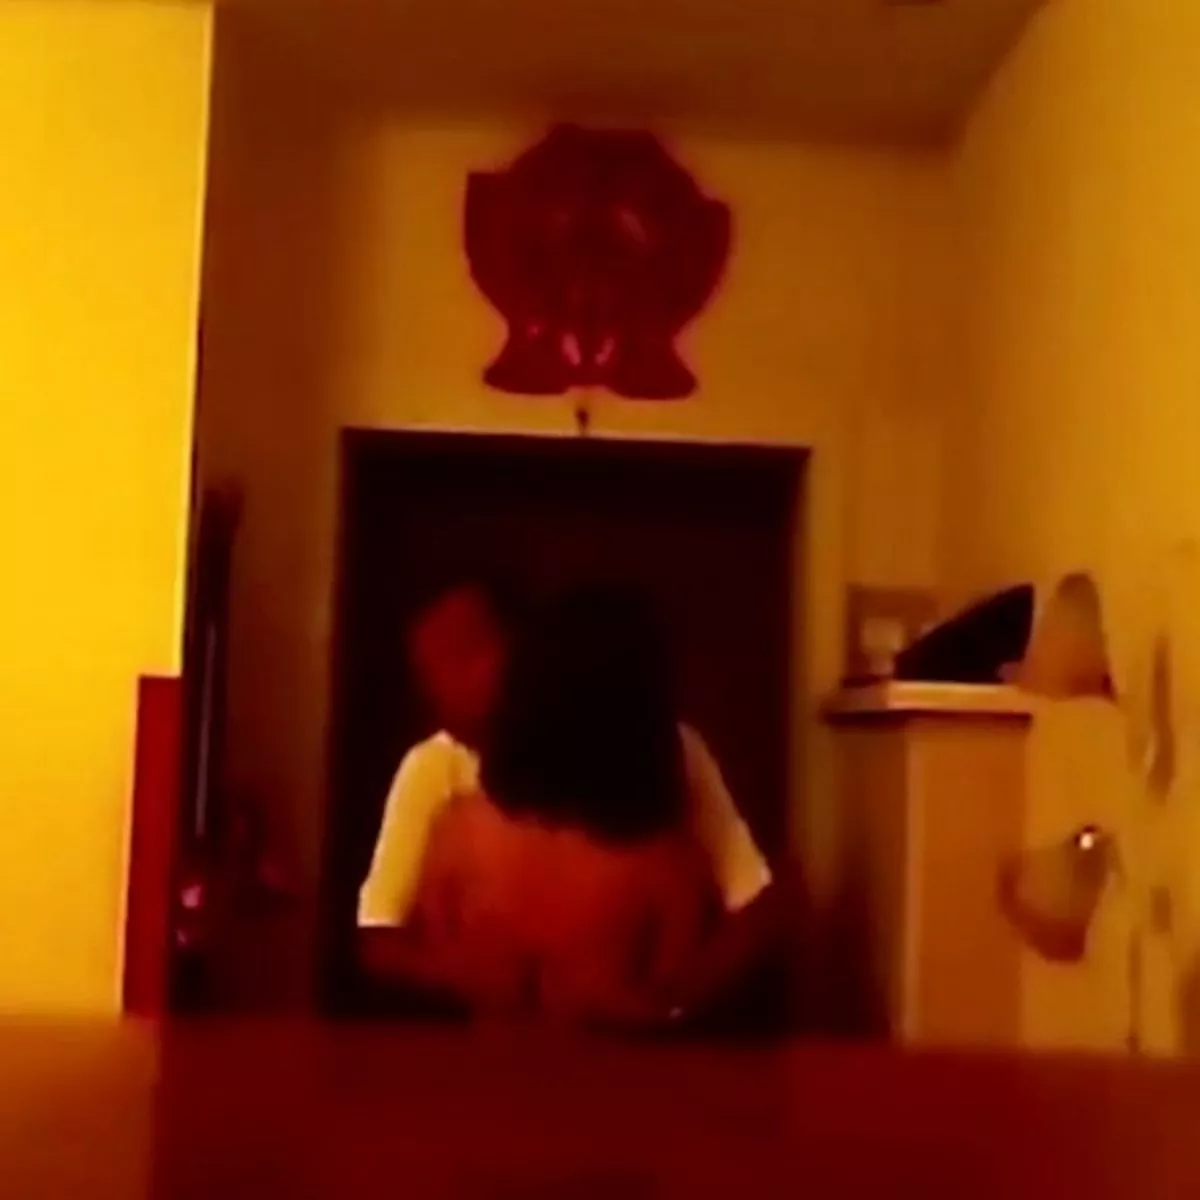 Best of Cheating wife caught by husband hidden camera